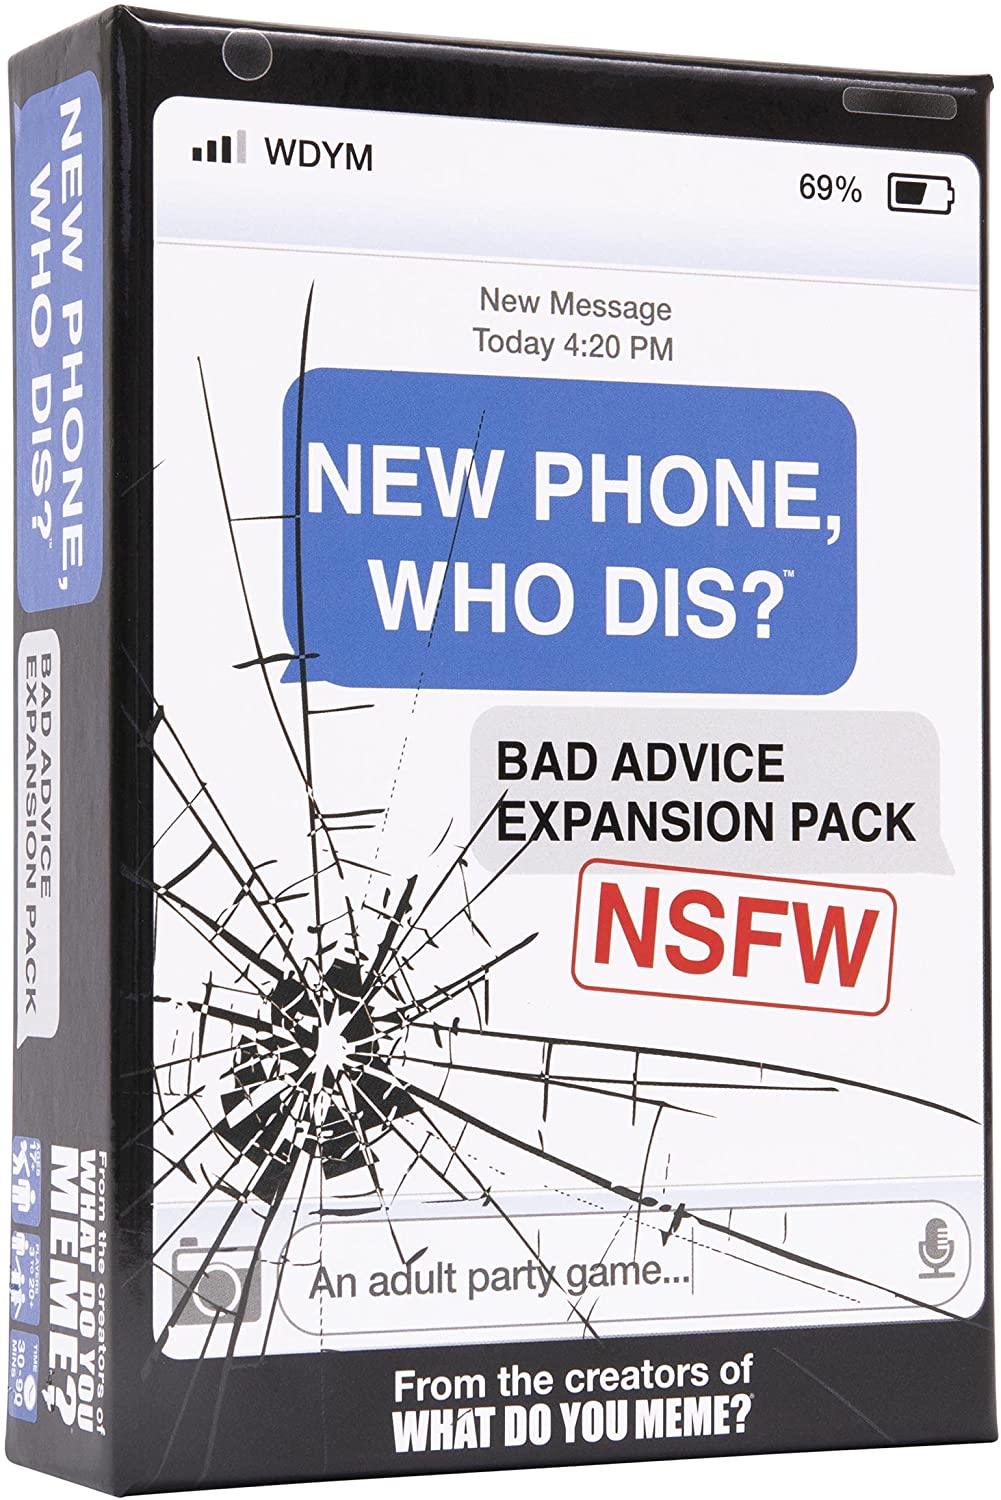 NEW PHONE WHO DIS? BAD ADVICE – Games and Stuff